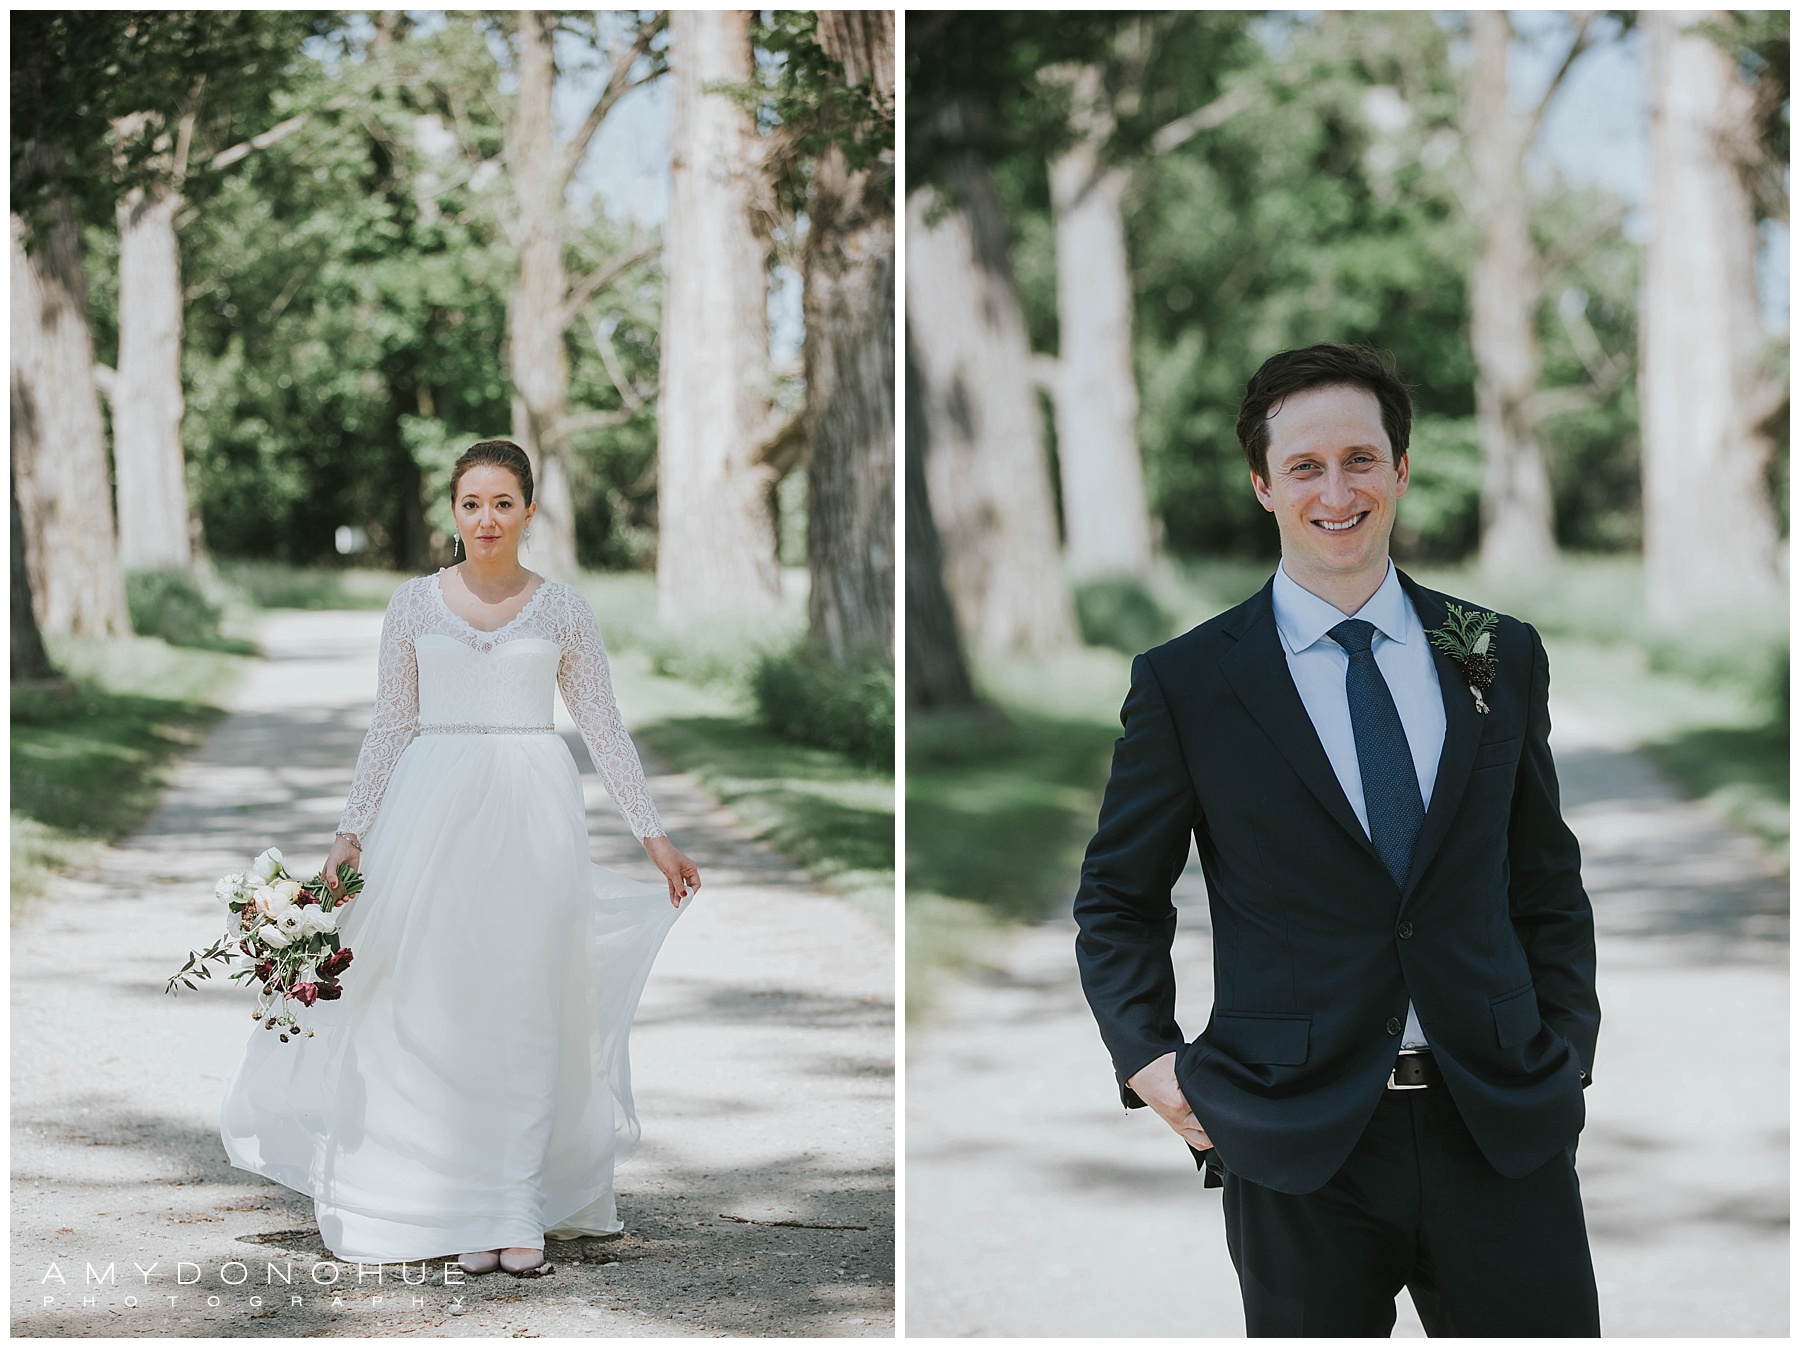 Bride and Groom Portraits | Photography by Amy Donohue Photography